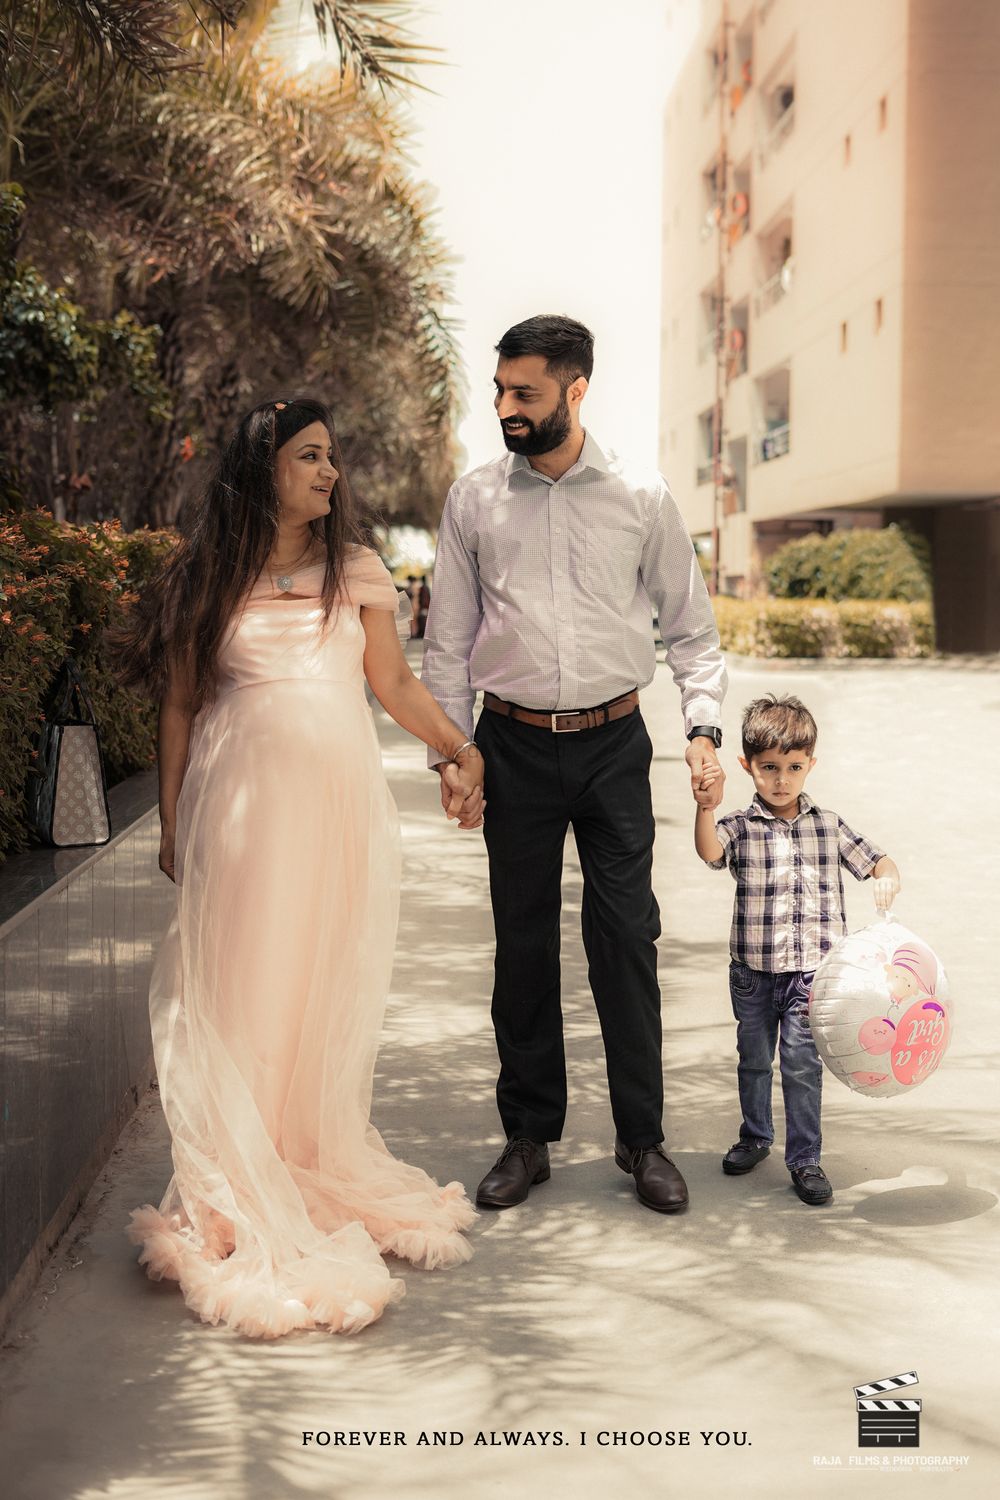 Photo From S&M 12 Months Maternity Shoot - By Raja Films & Photography